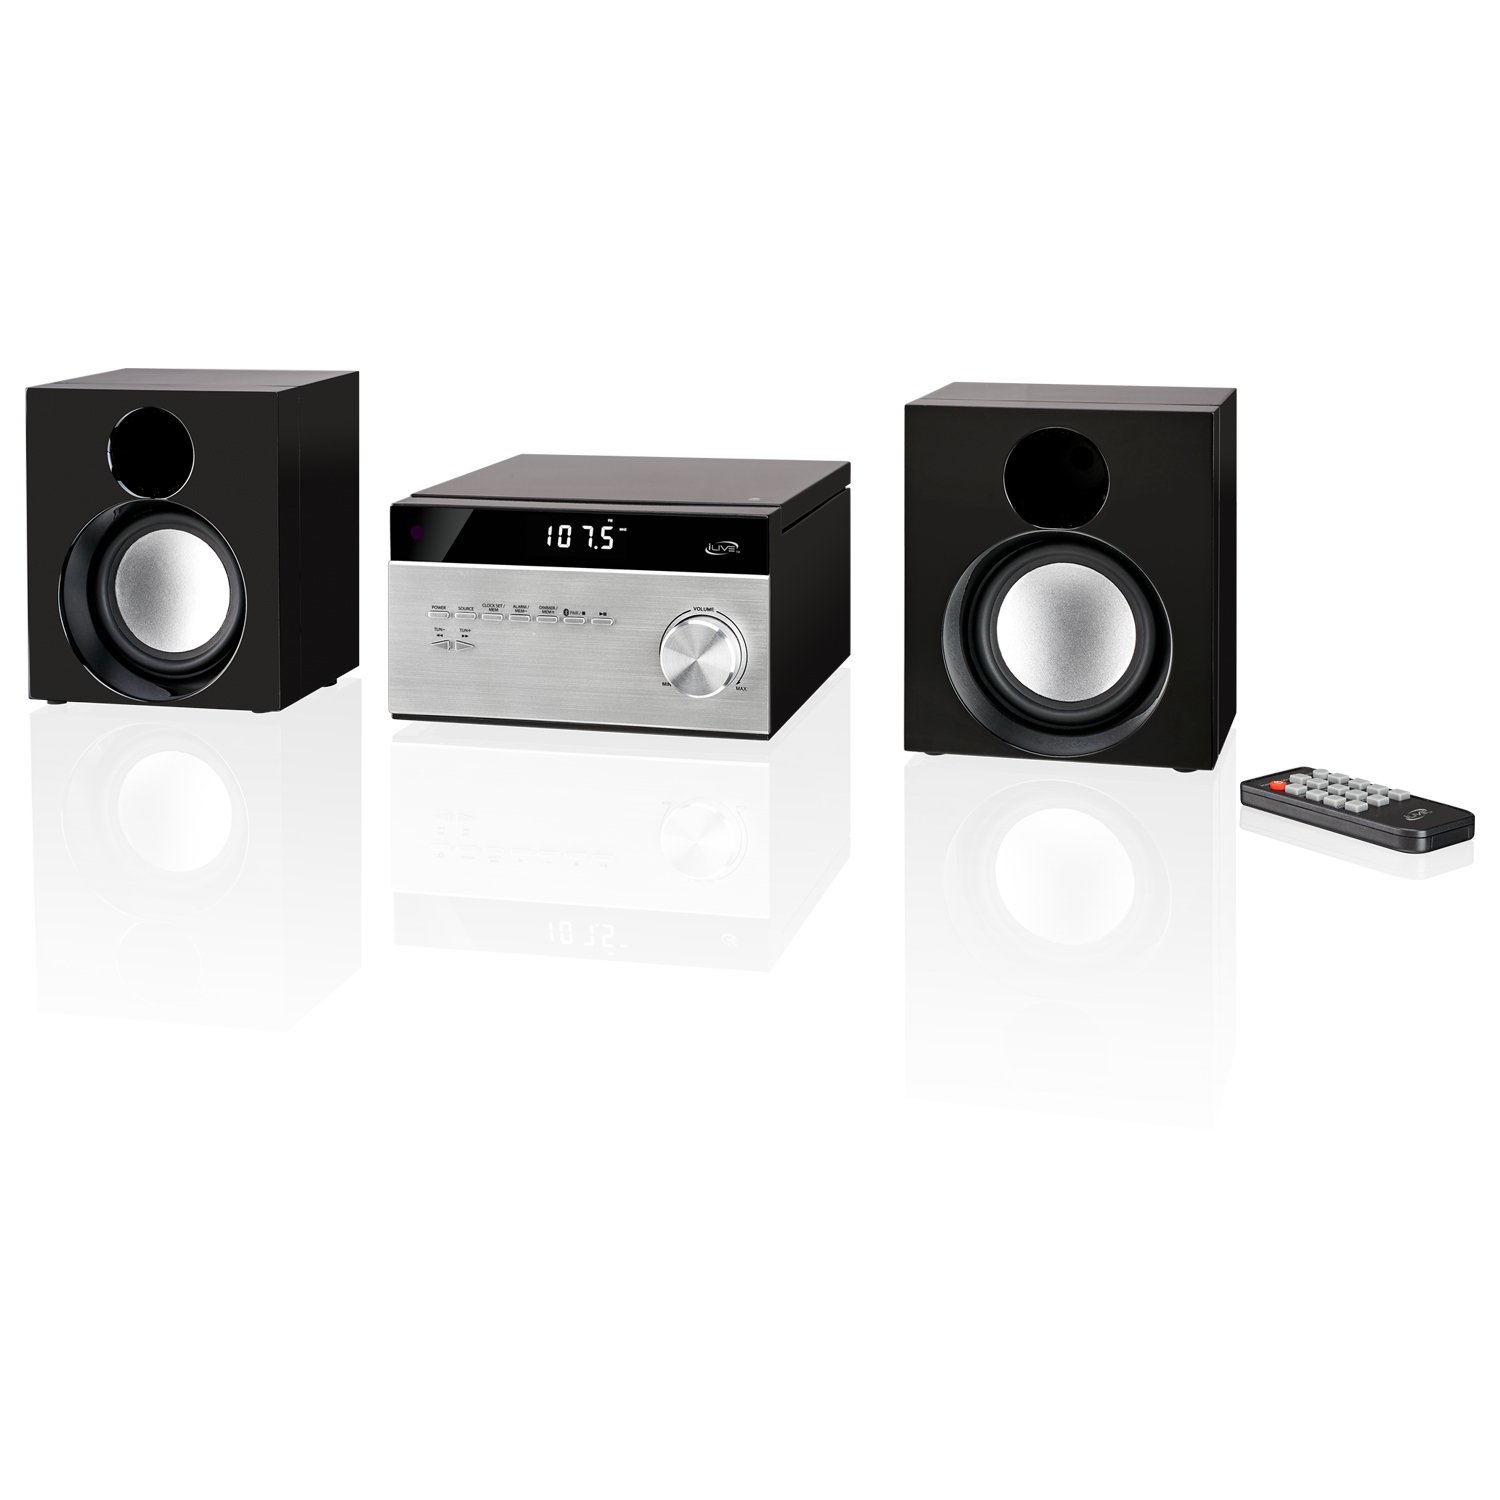 iLive Wireless Home Stereo System, with CD Player and AM/FM Radio, Includes Remote Control (iHB227B),Black/Silver